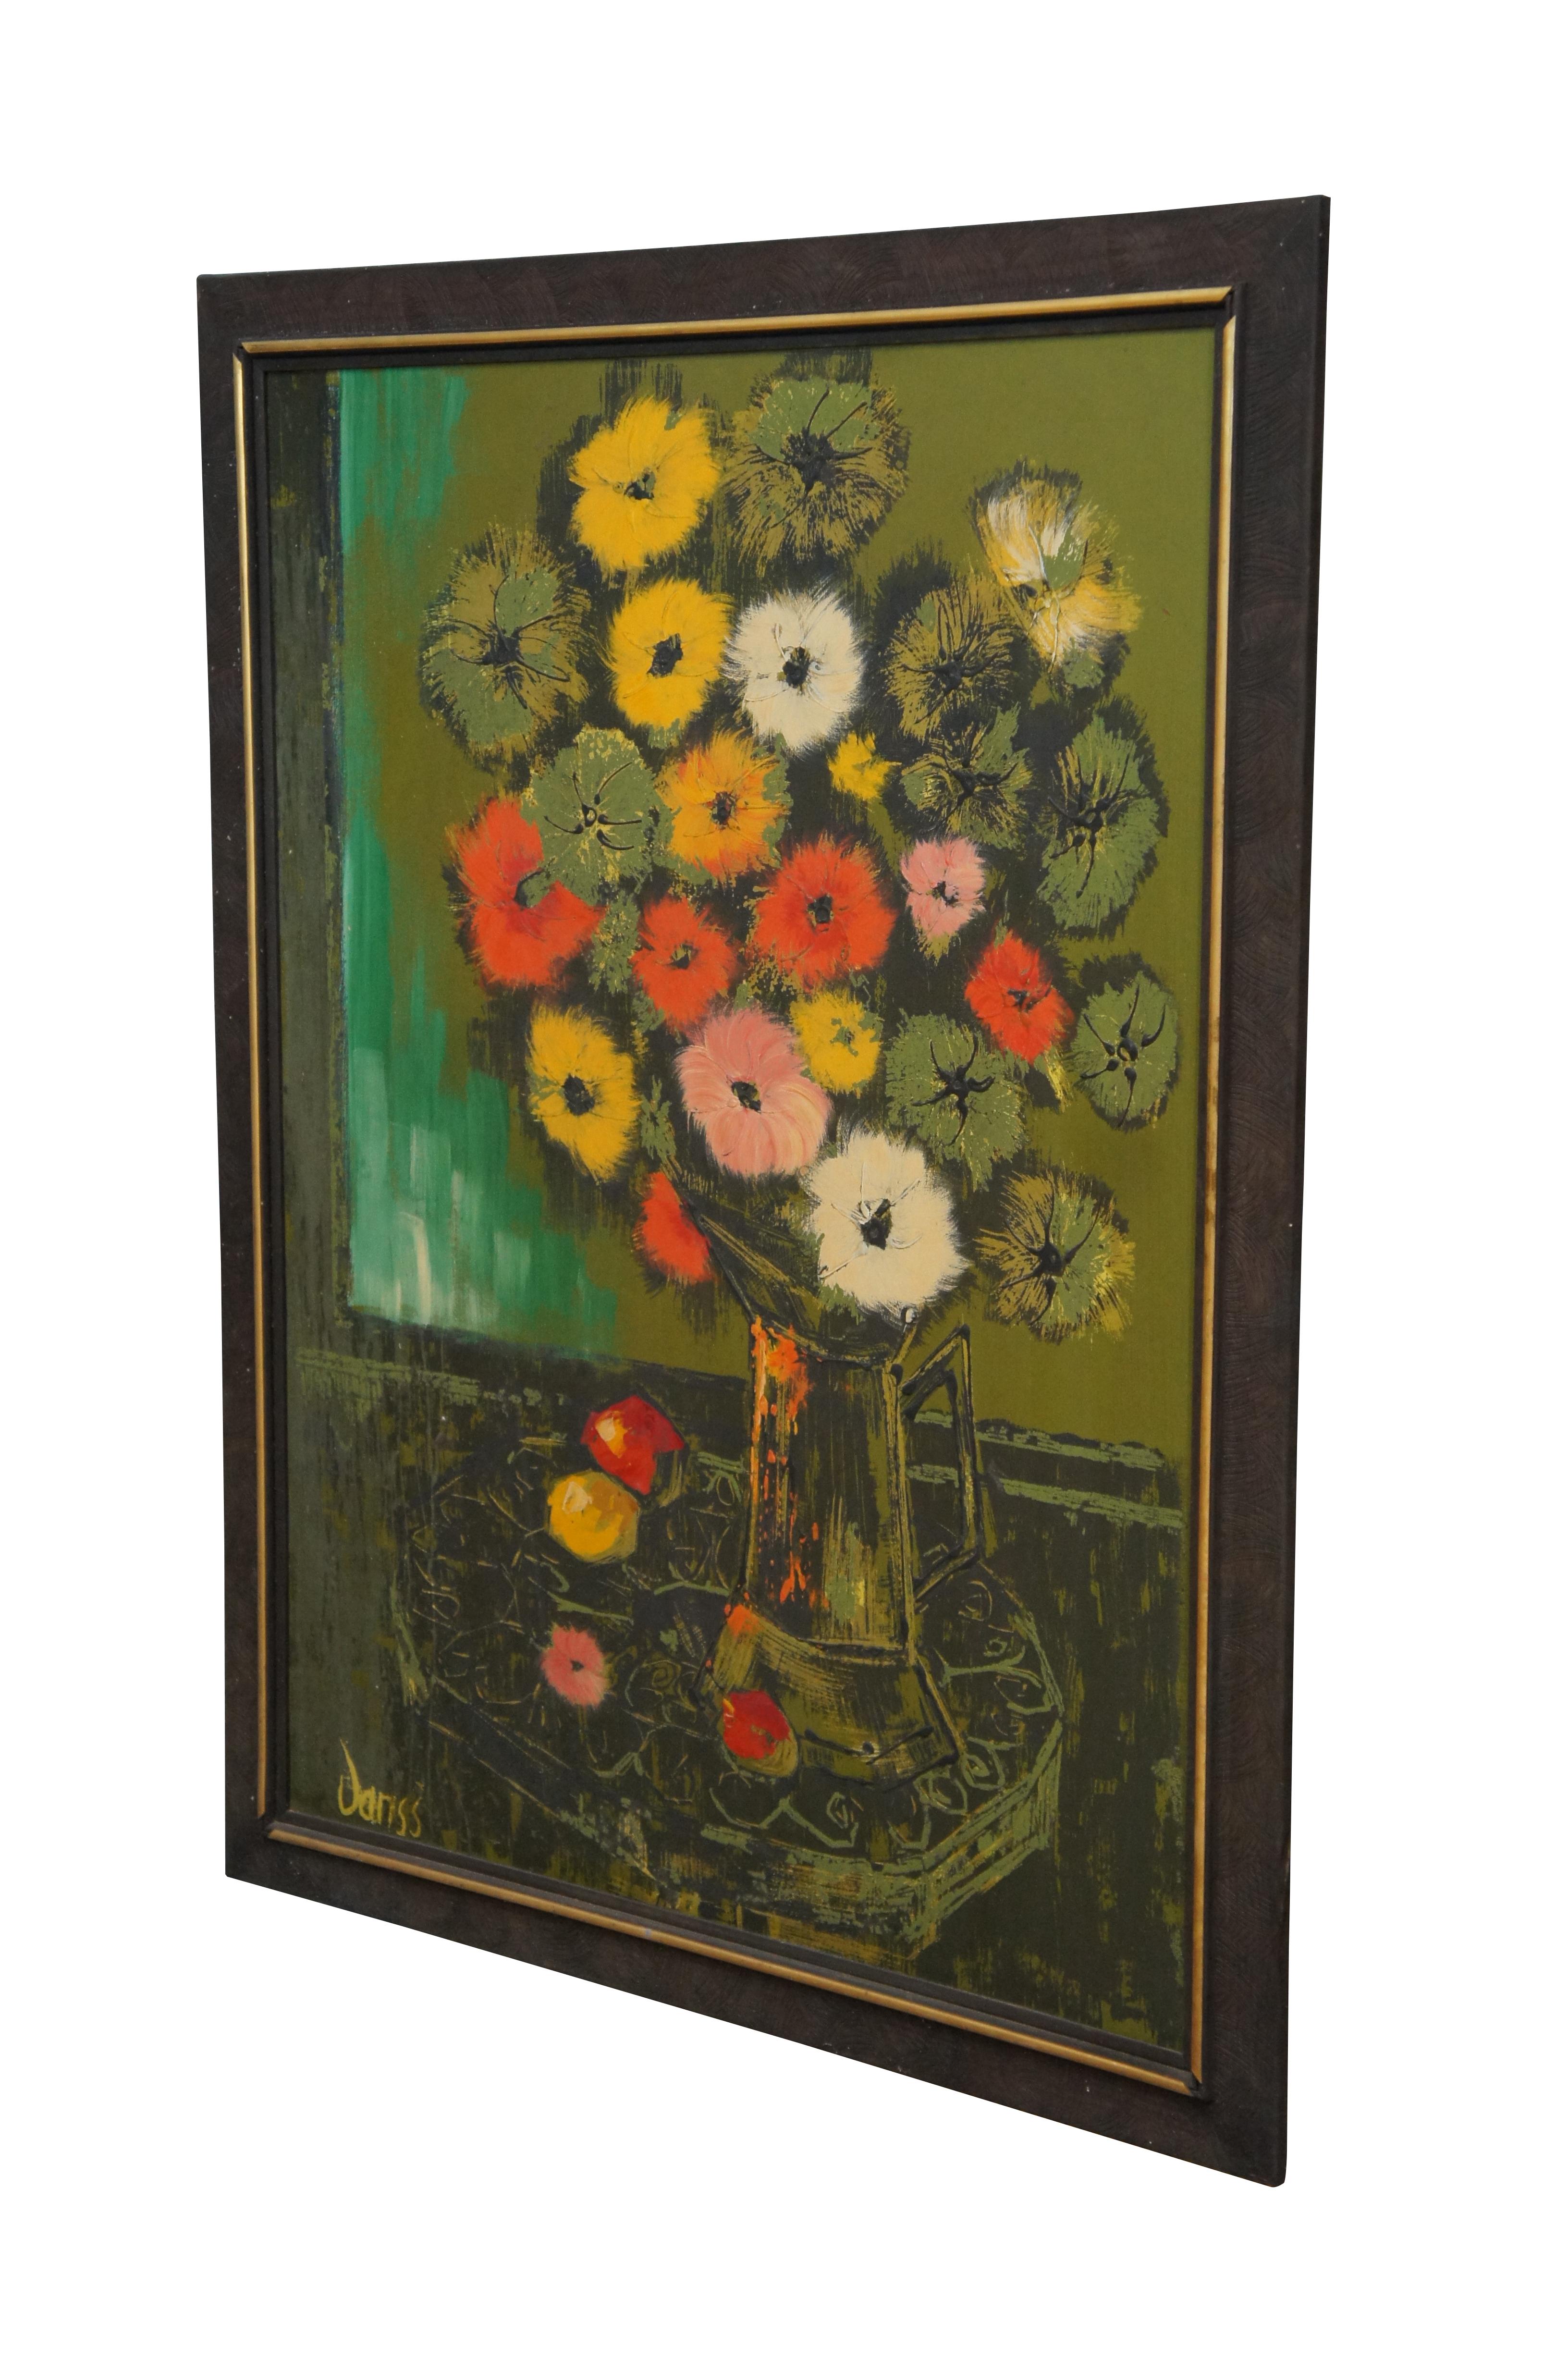 Vintage Mid-Century Modern floral still life showing a vase of zinnias on a decorative table. Mixed media, print and oil on board. Signed in stone lower left. Appears to say Janss

Measures: 34.5” x 0.75” x 44.5” / Sans Frame - 29.5” x 39.75”